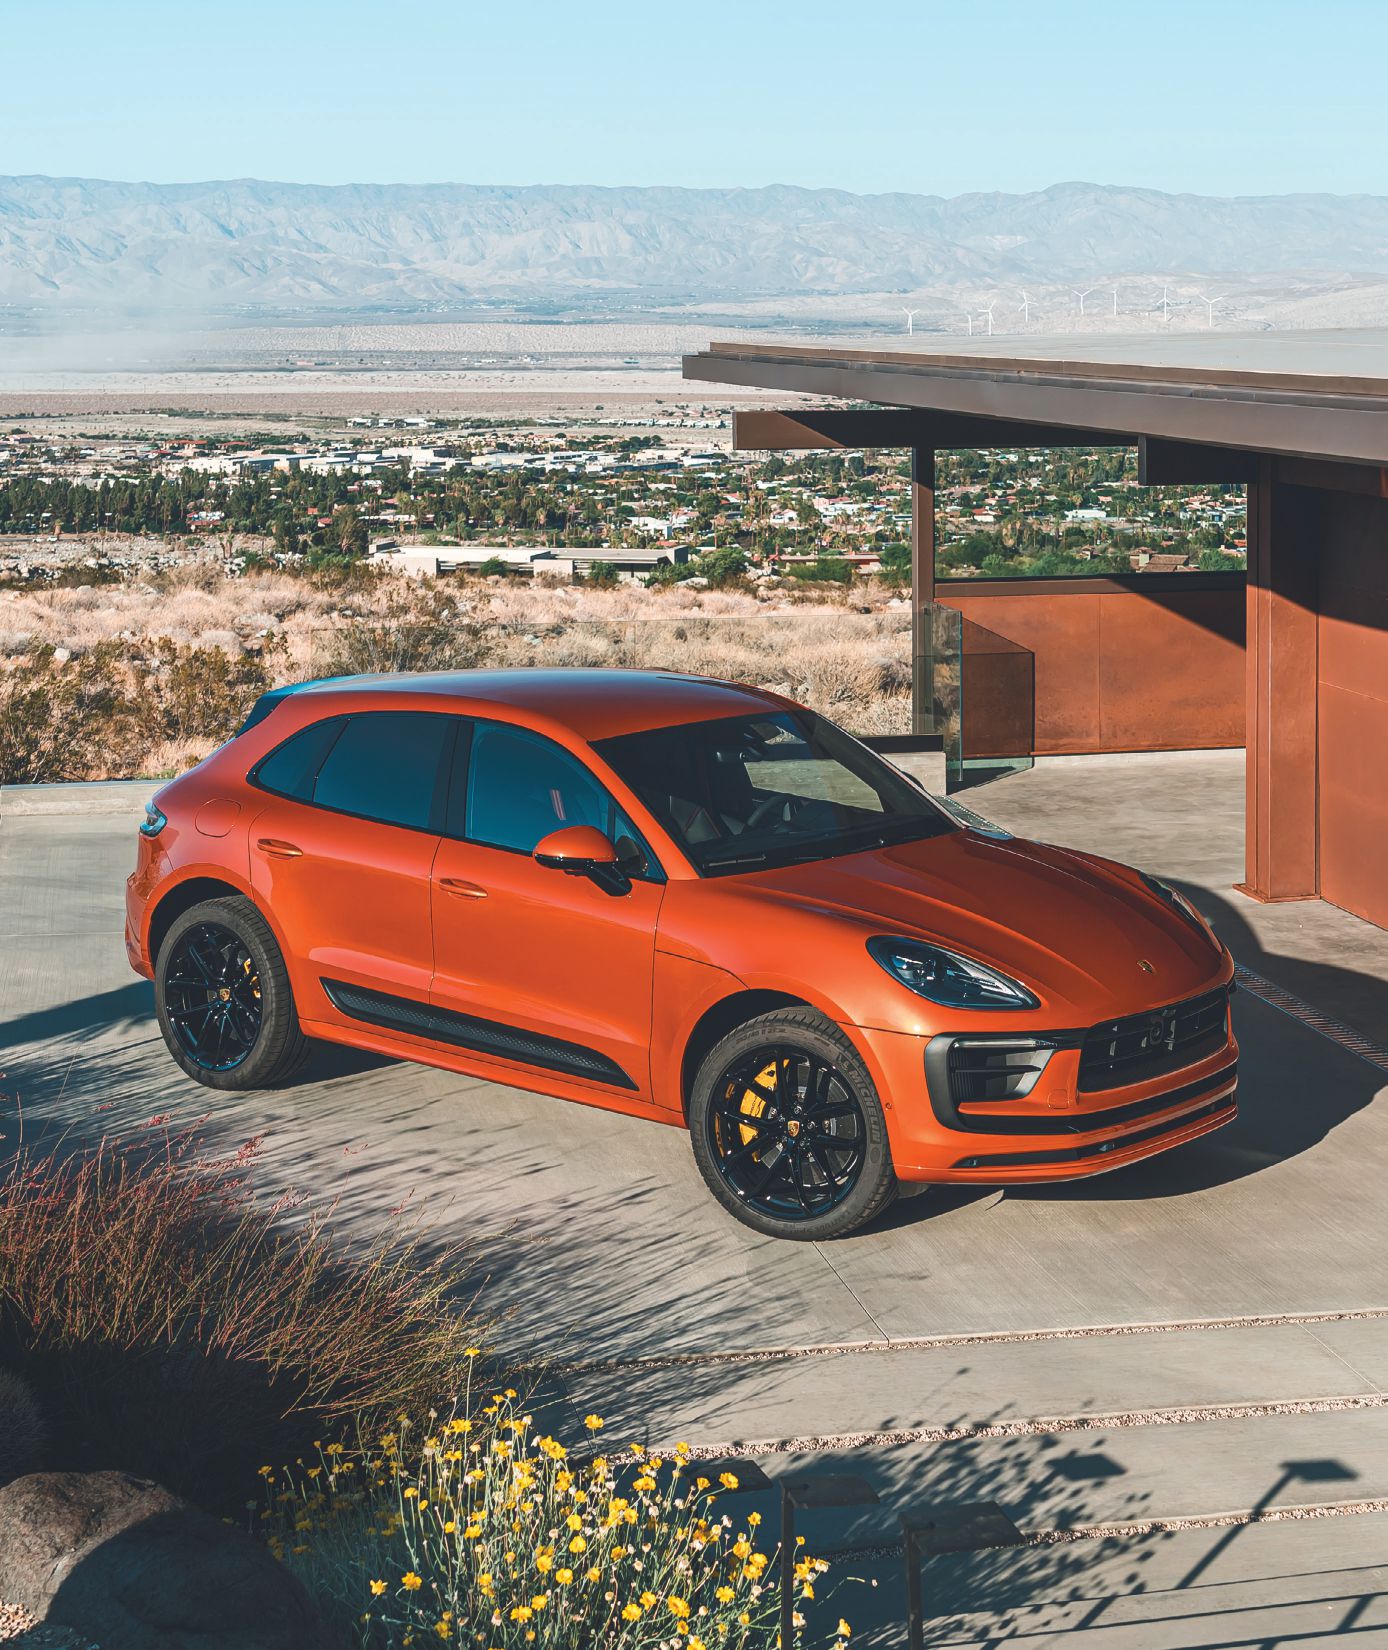 With Porsche Drive’s subscription program, members can get the latest Porsche models—like this Macan in striking Papaya metallic—delivered right to their door. PHOTO COURTESY OF PORSCHE